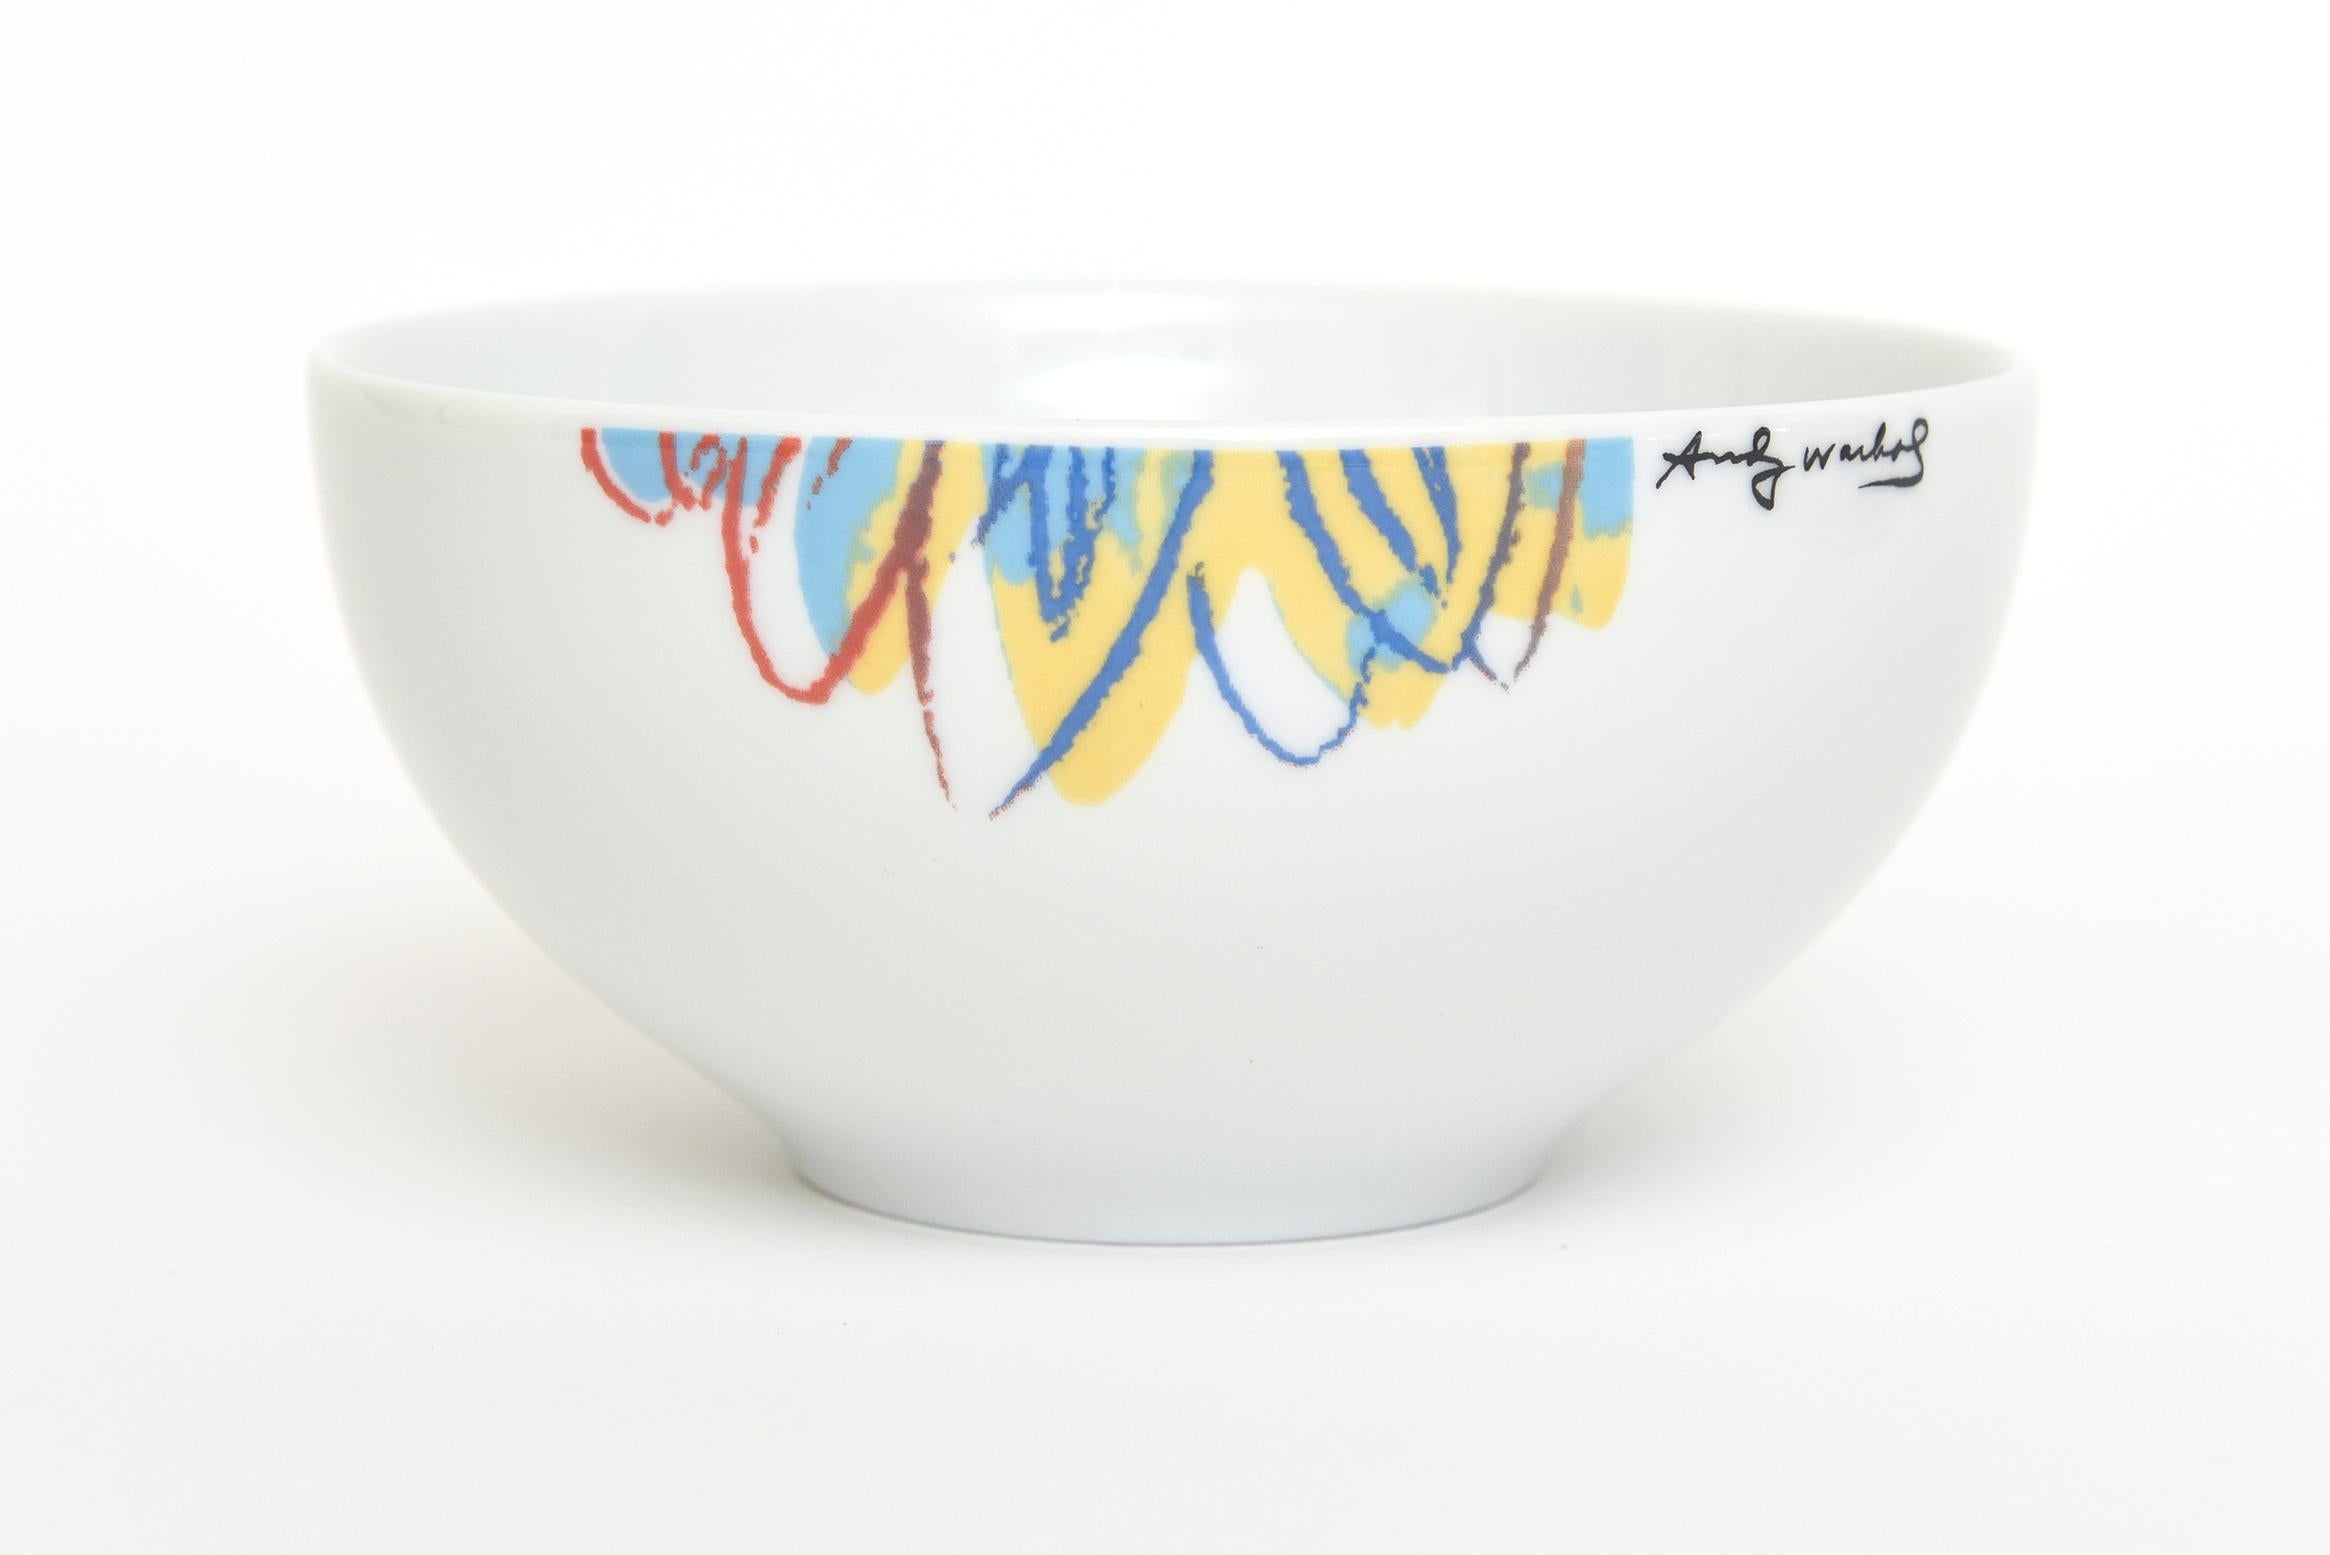 Rosenthal Studio Line Flower Porcelain Covered Sugar Bowl After Andy Warhol In Good Condition For Sale In North Miami, FL